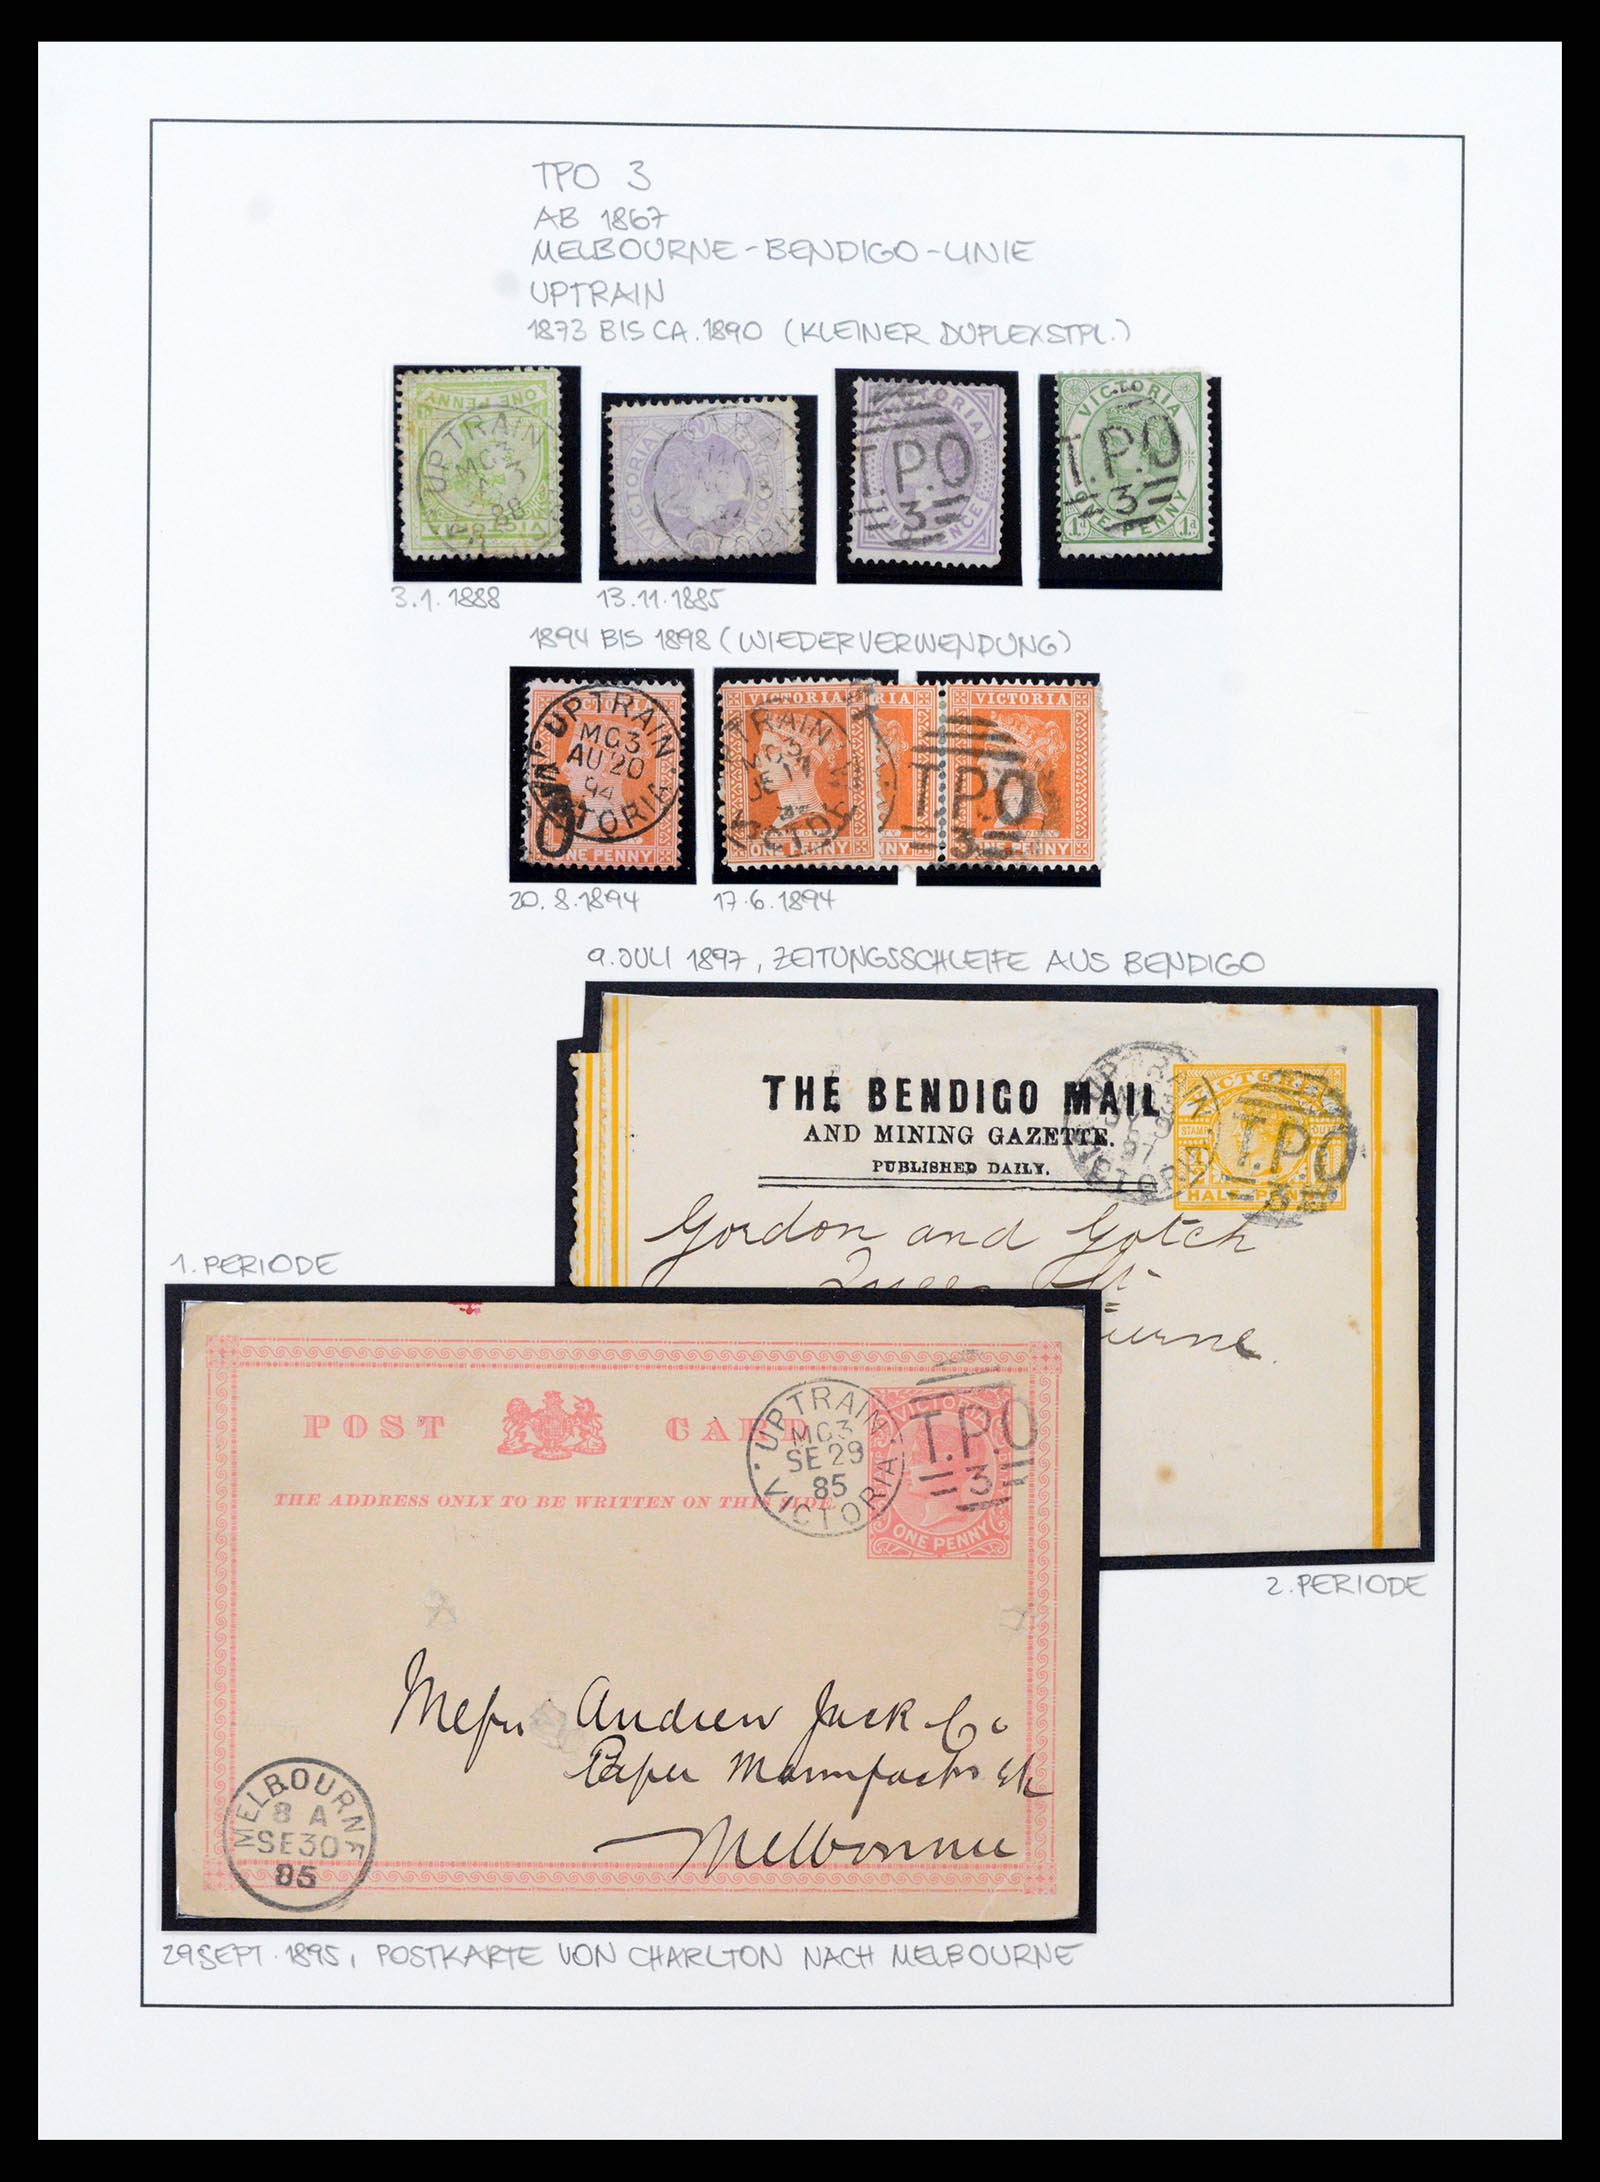 37514 004 - Stamp collection 37514 Victoria tpo cancellations 1865-1930.